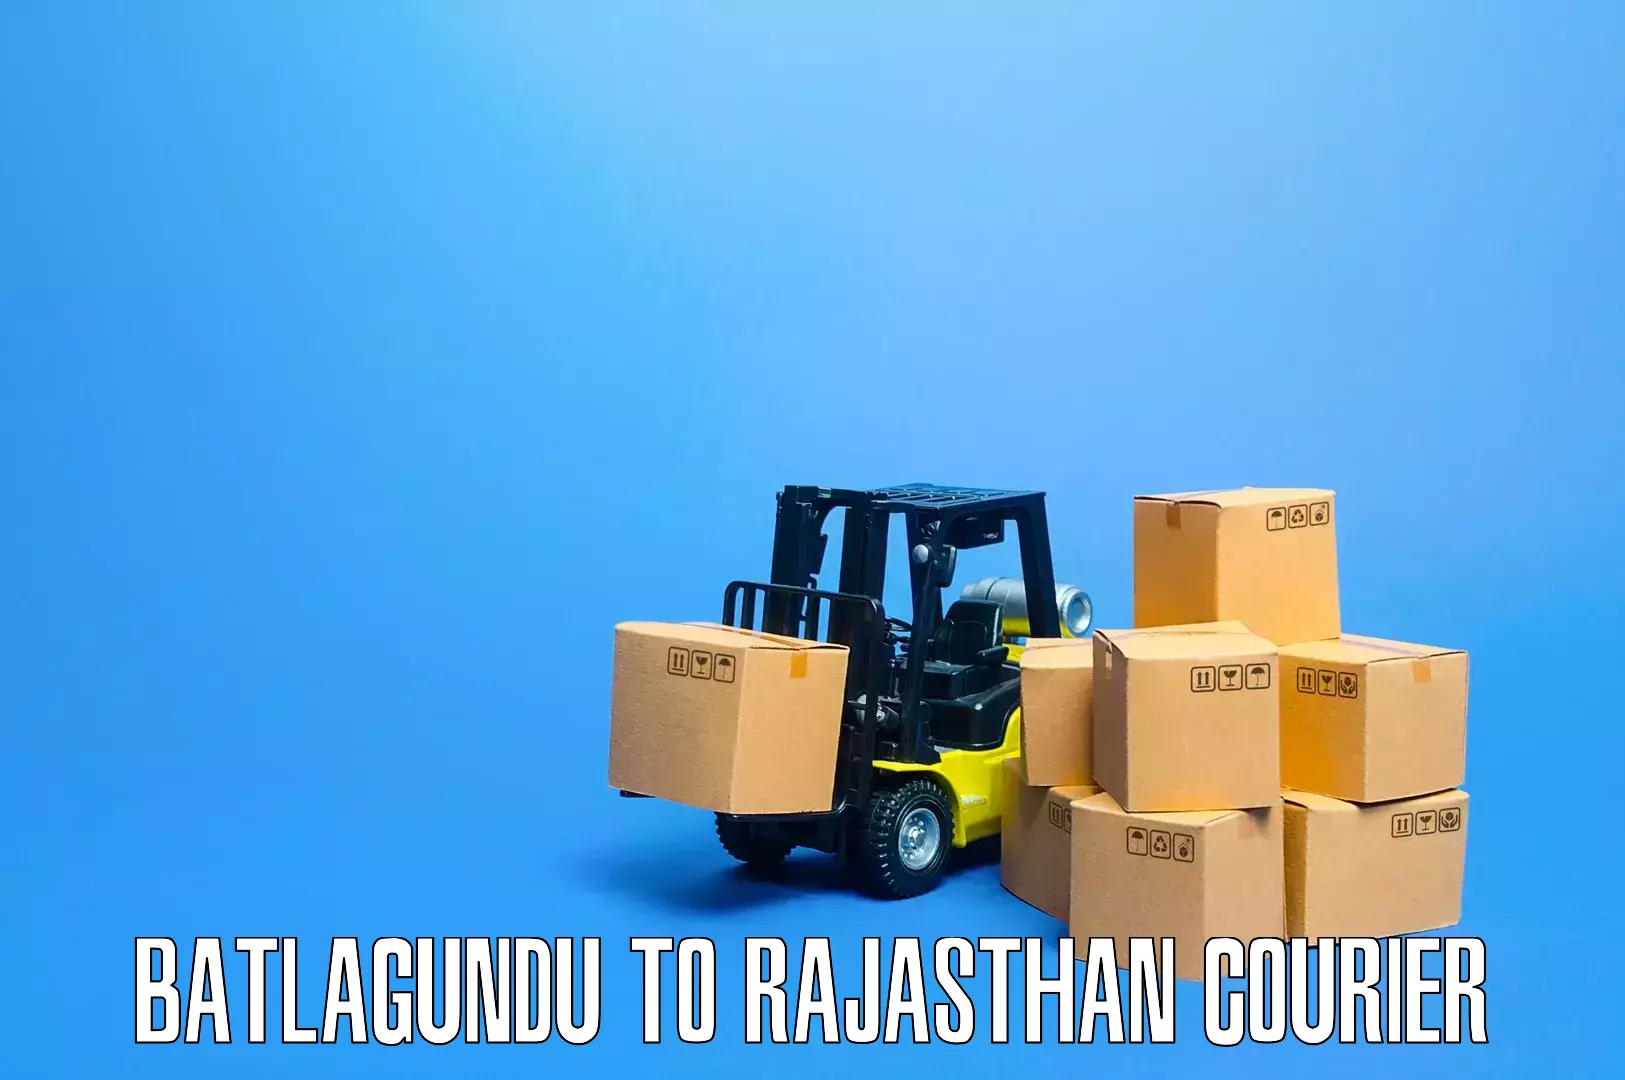 Cost-effective moving solutions in Batlagundu to Jaipur